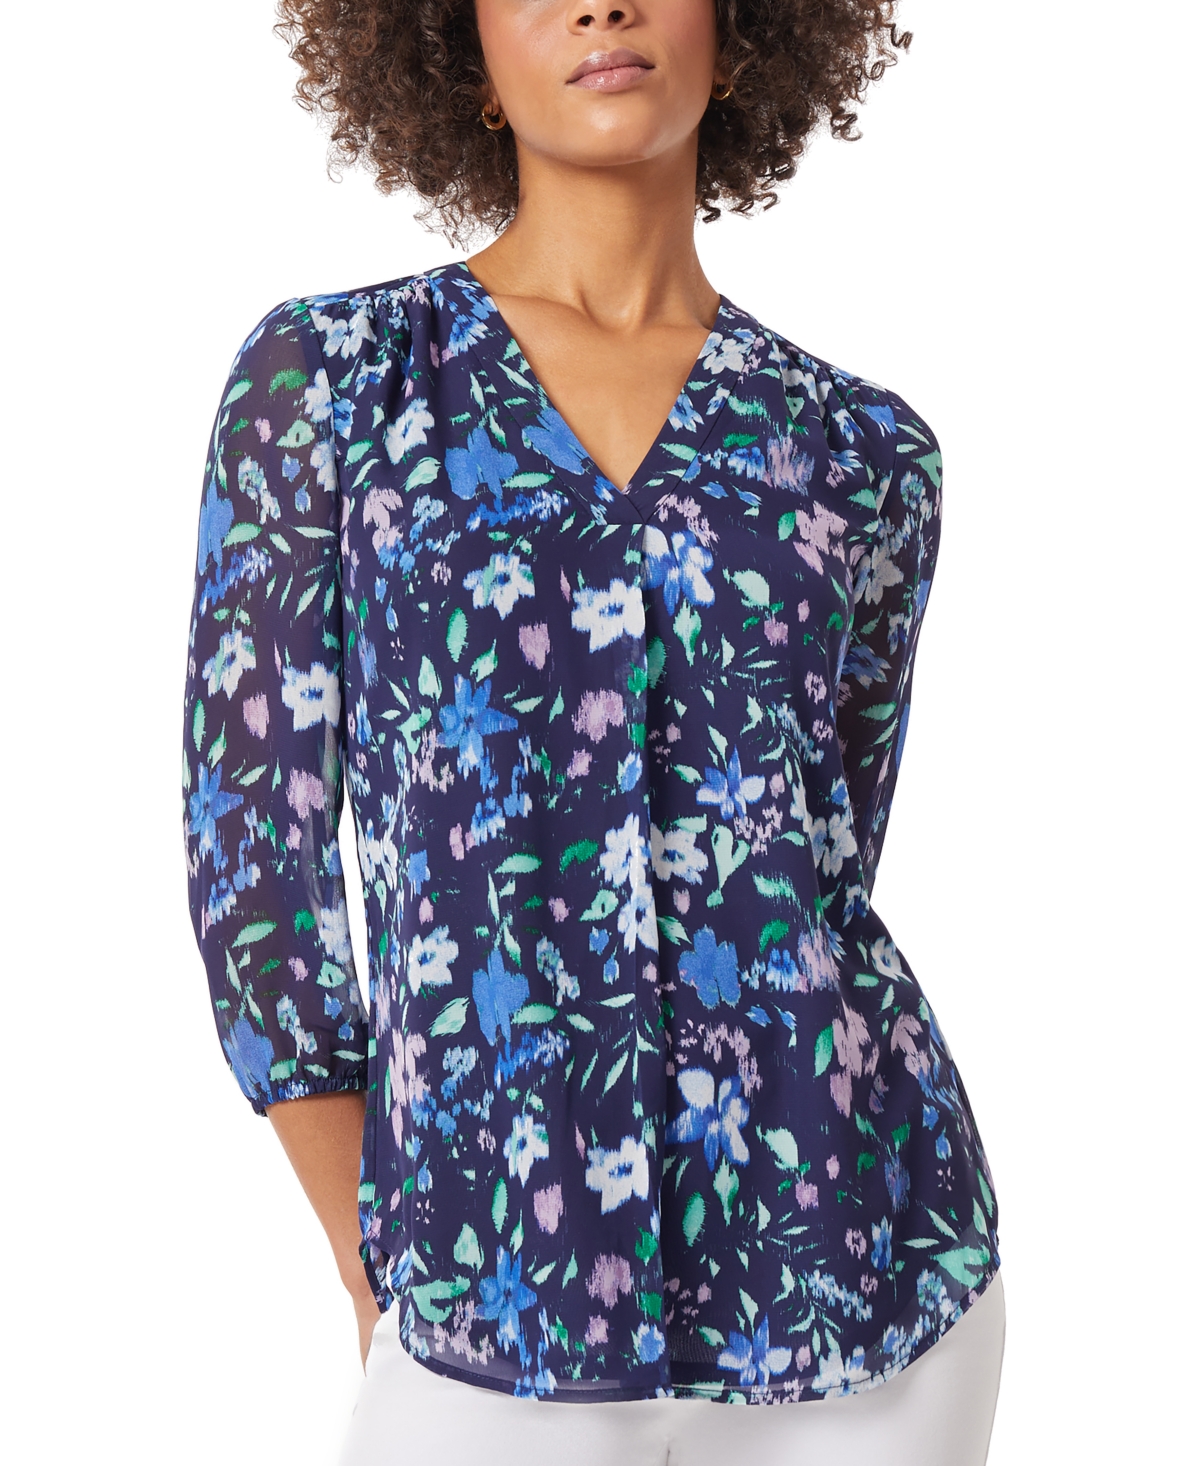 Women's Floral-Print 3/4-Sleeve V-Neck Top - Pacific Navy Multi